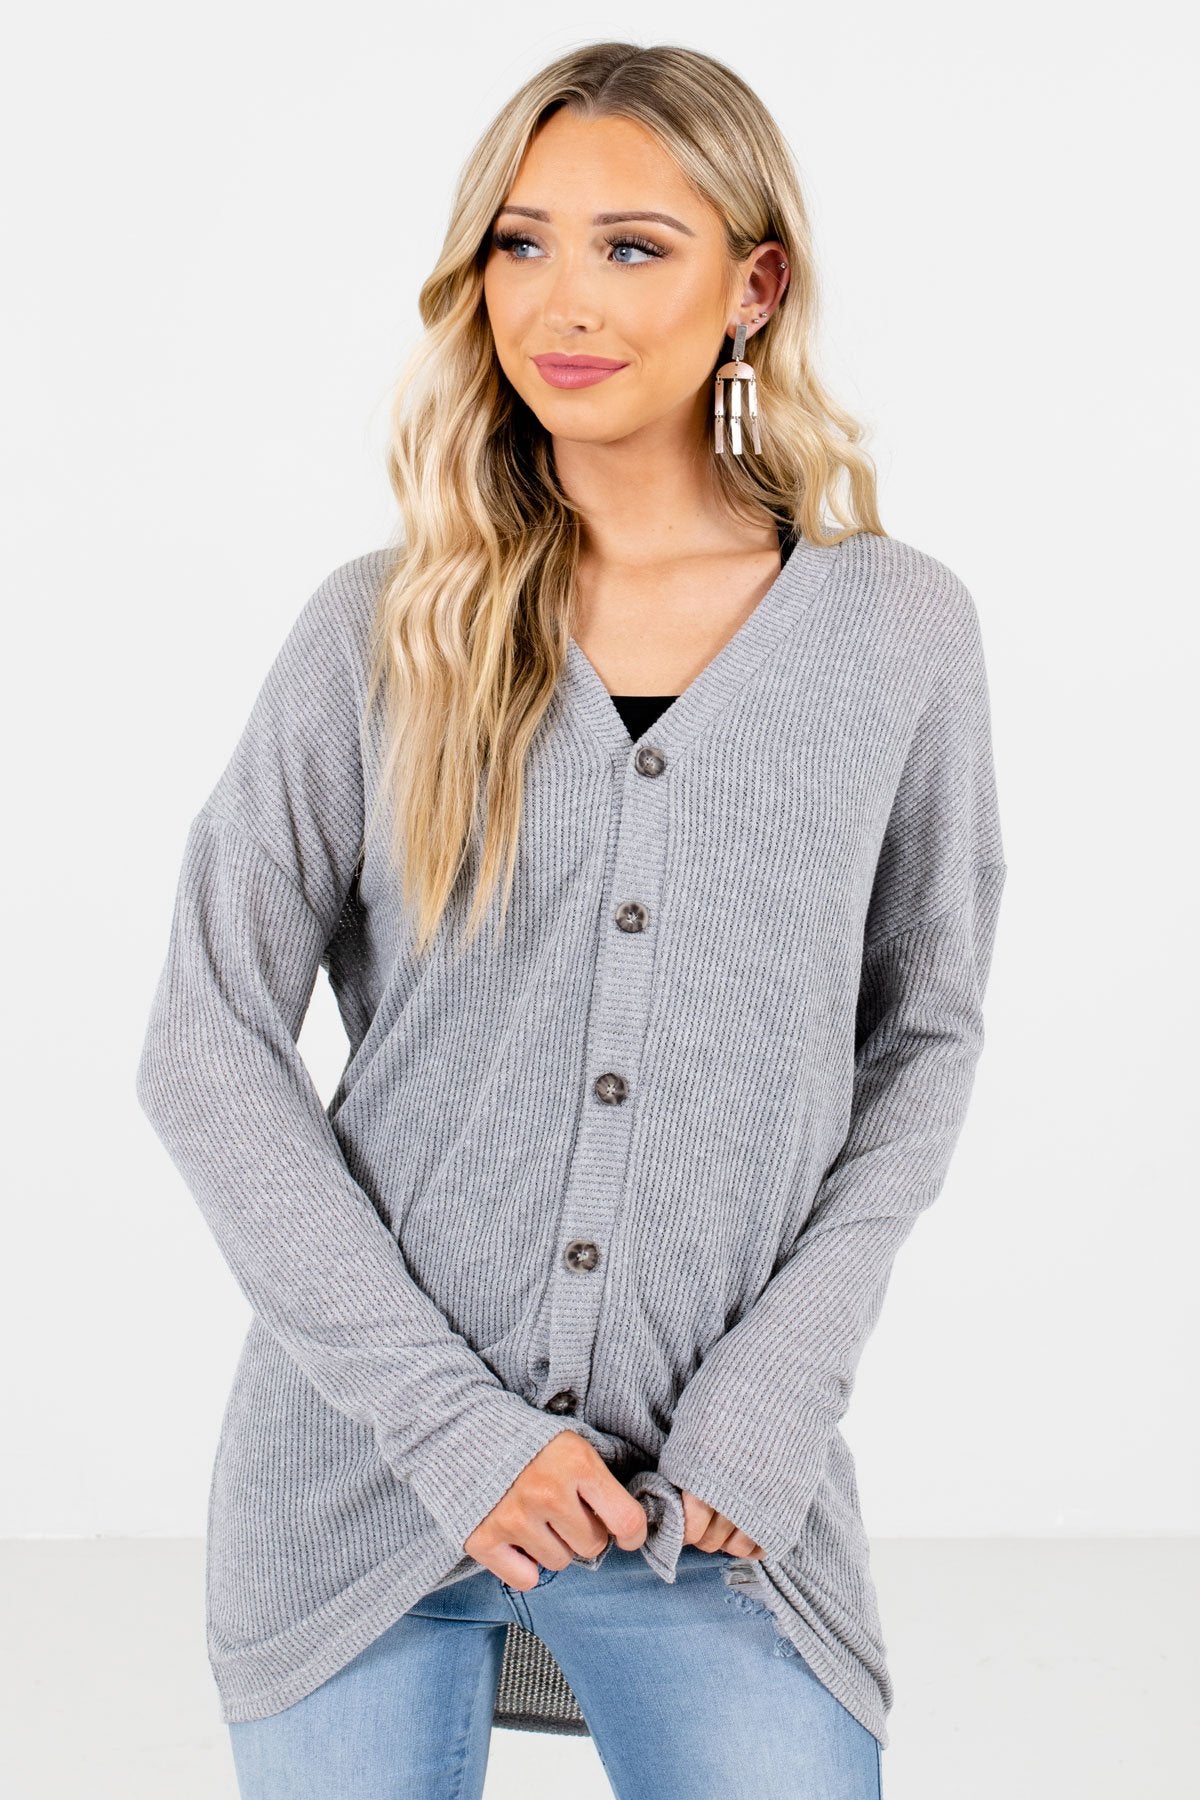 Heather Gray Button-Up Front Boutique Tops for Women